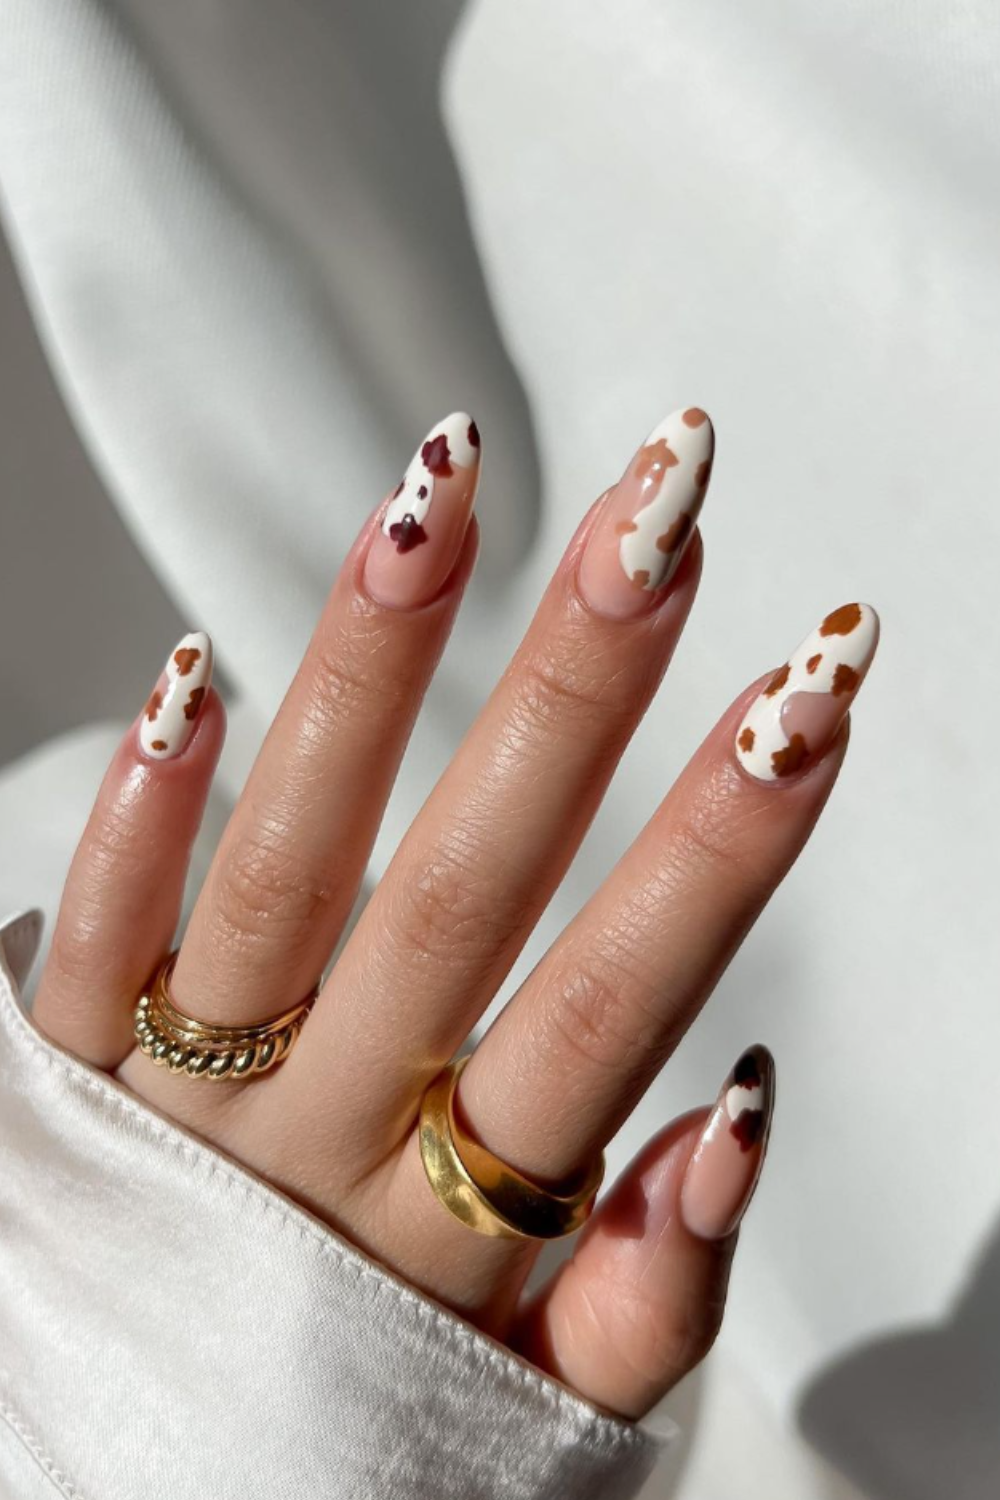 The Best Nail Designs Photos and Editing Tutorials - BeautyPlus